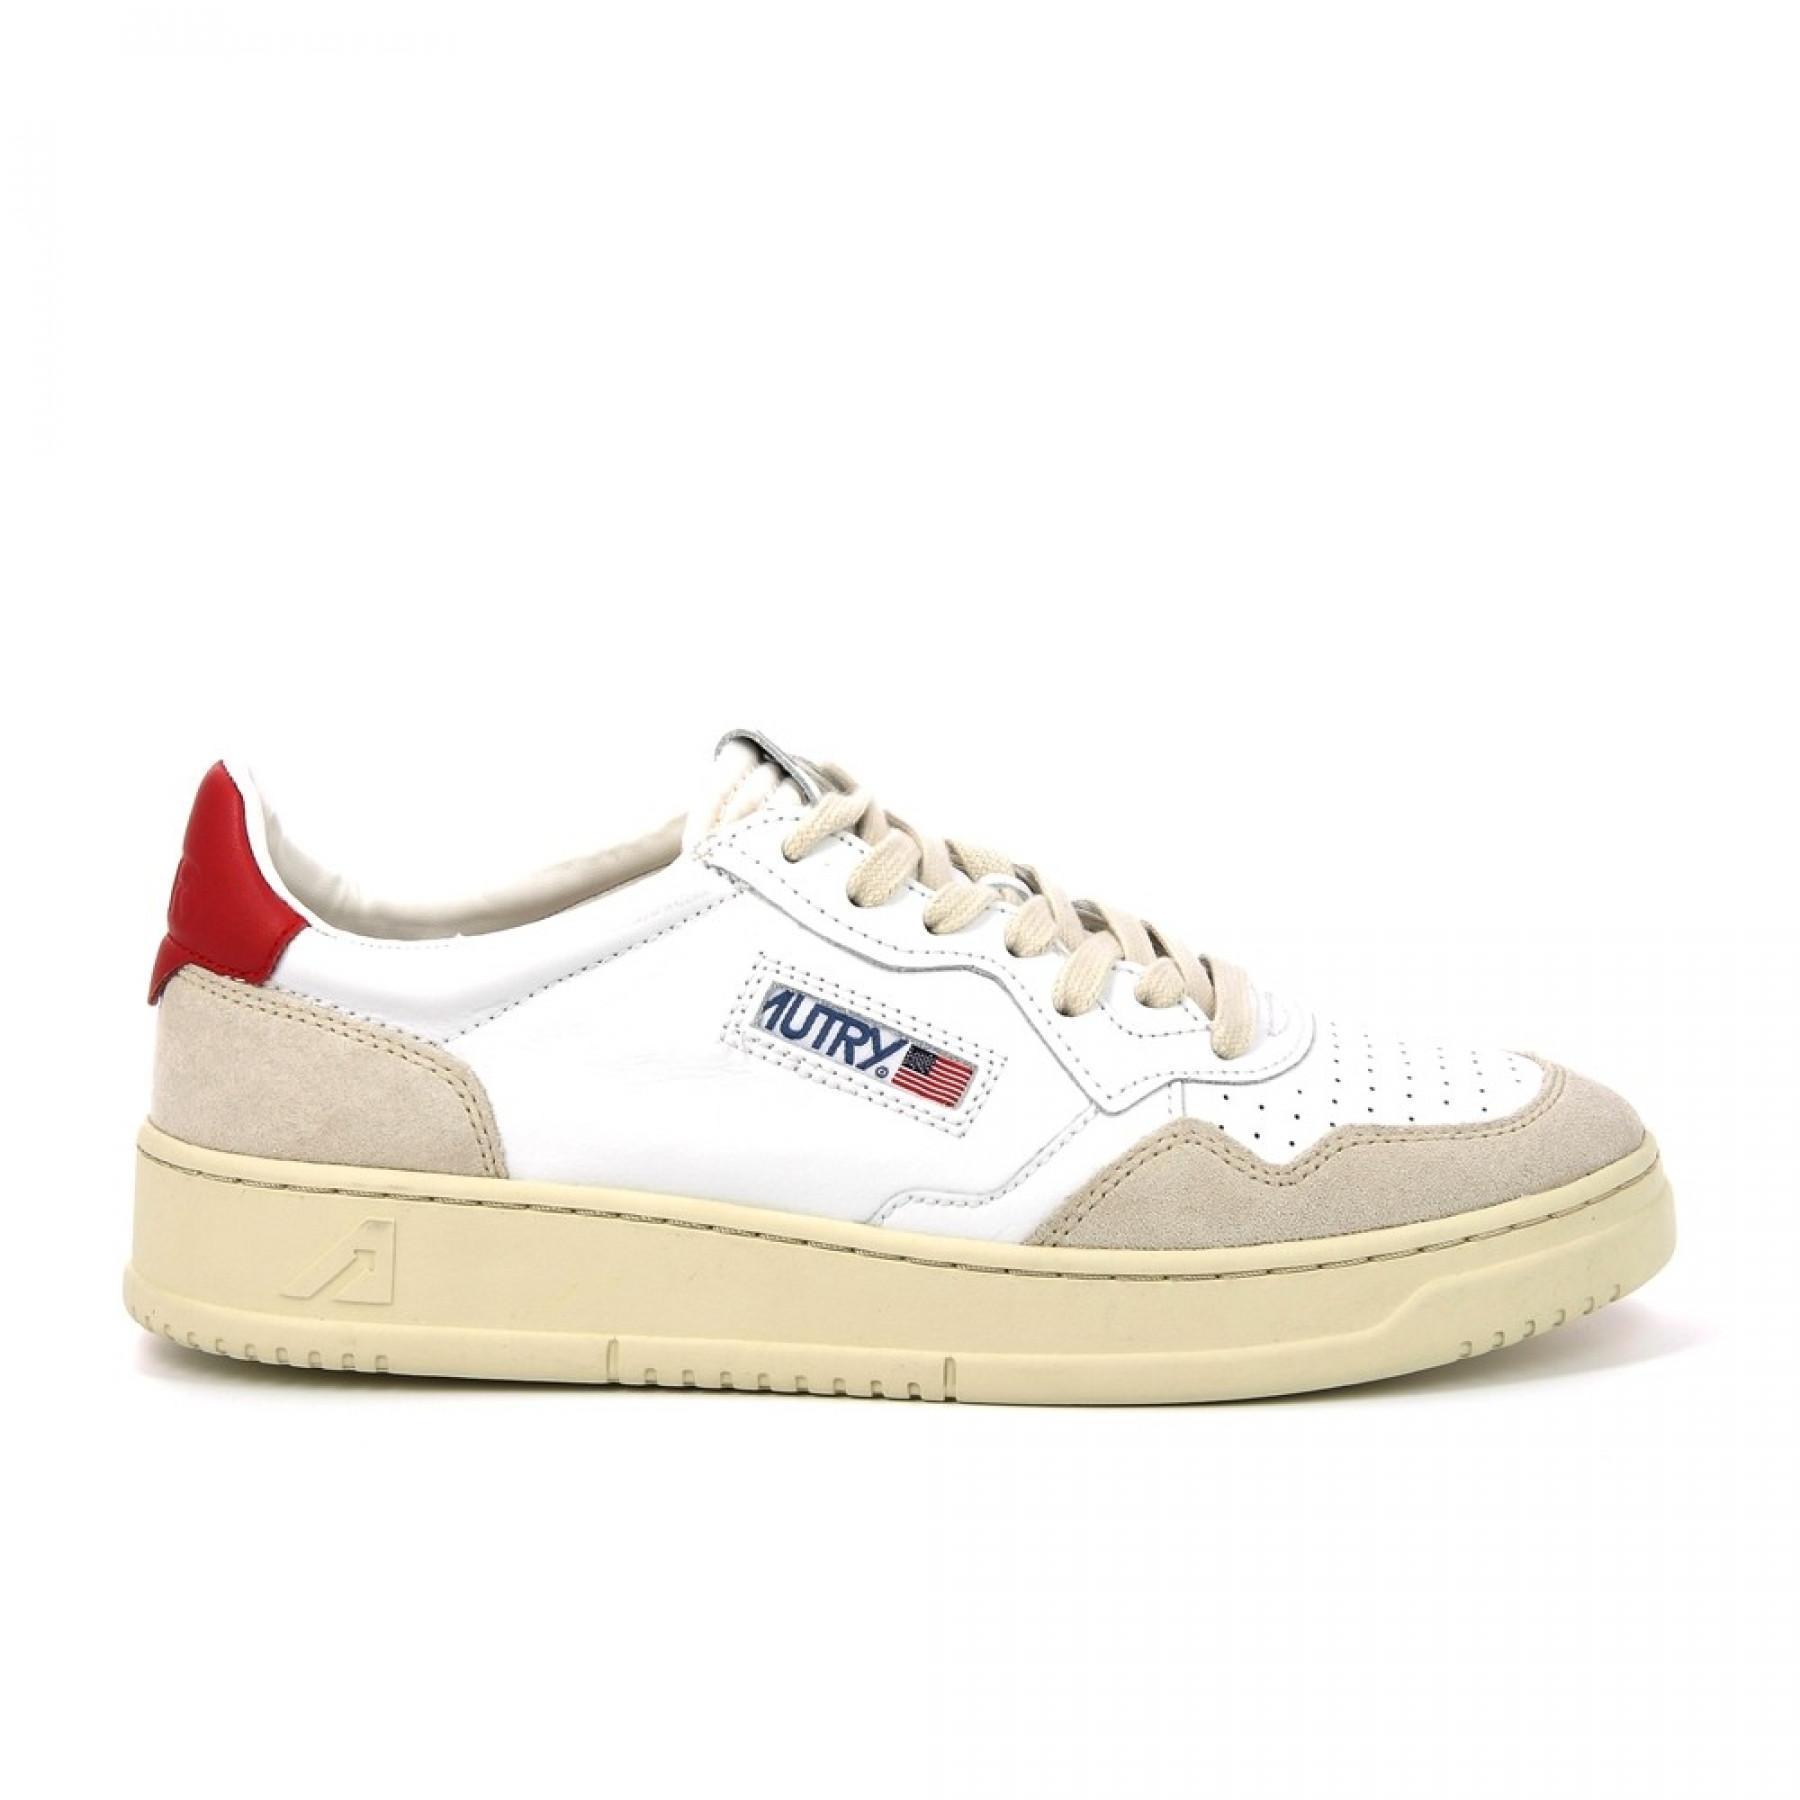 Formadores Autry Medalist LS24 Leather/Suede White Red